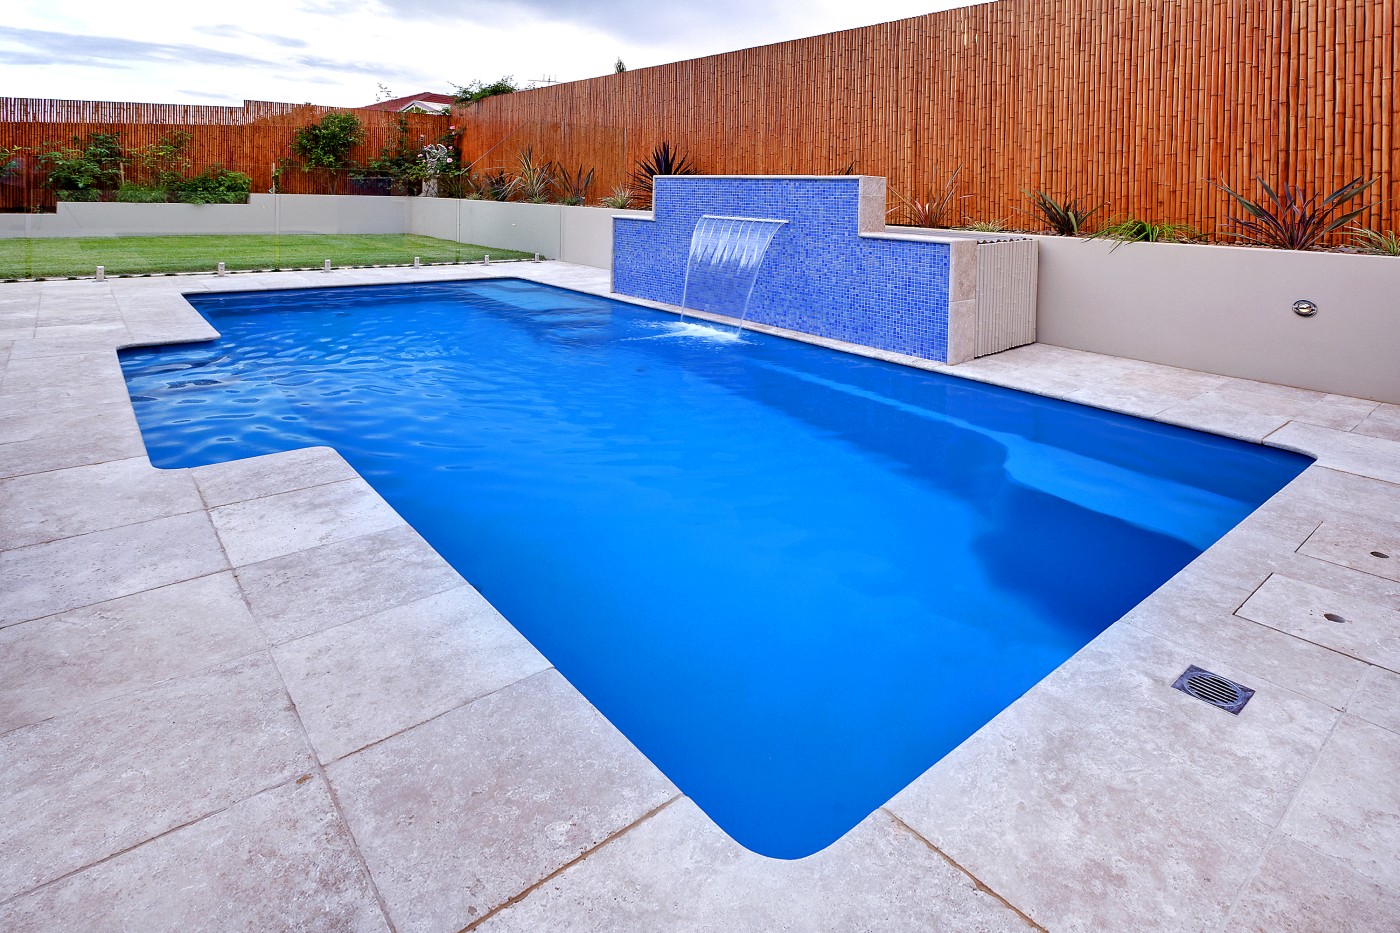 Vogue - Beautiful Family Pool | Central Pools